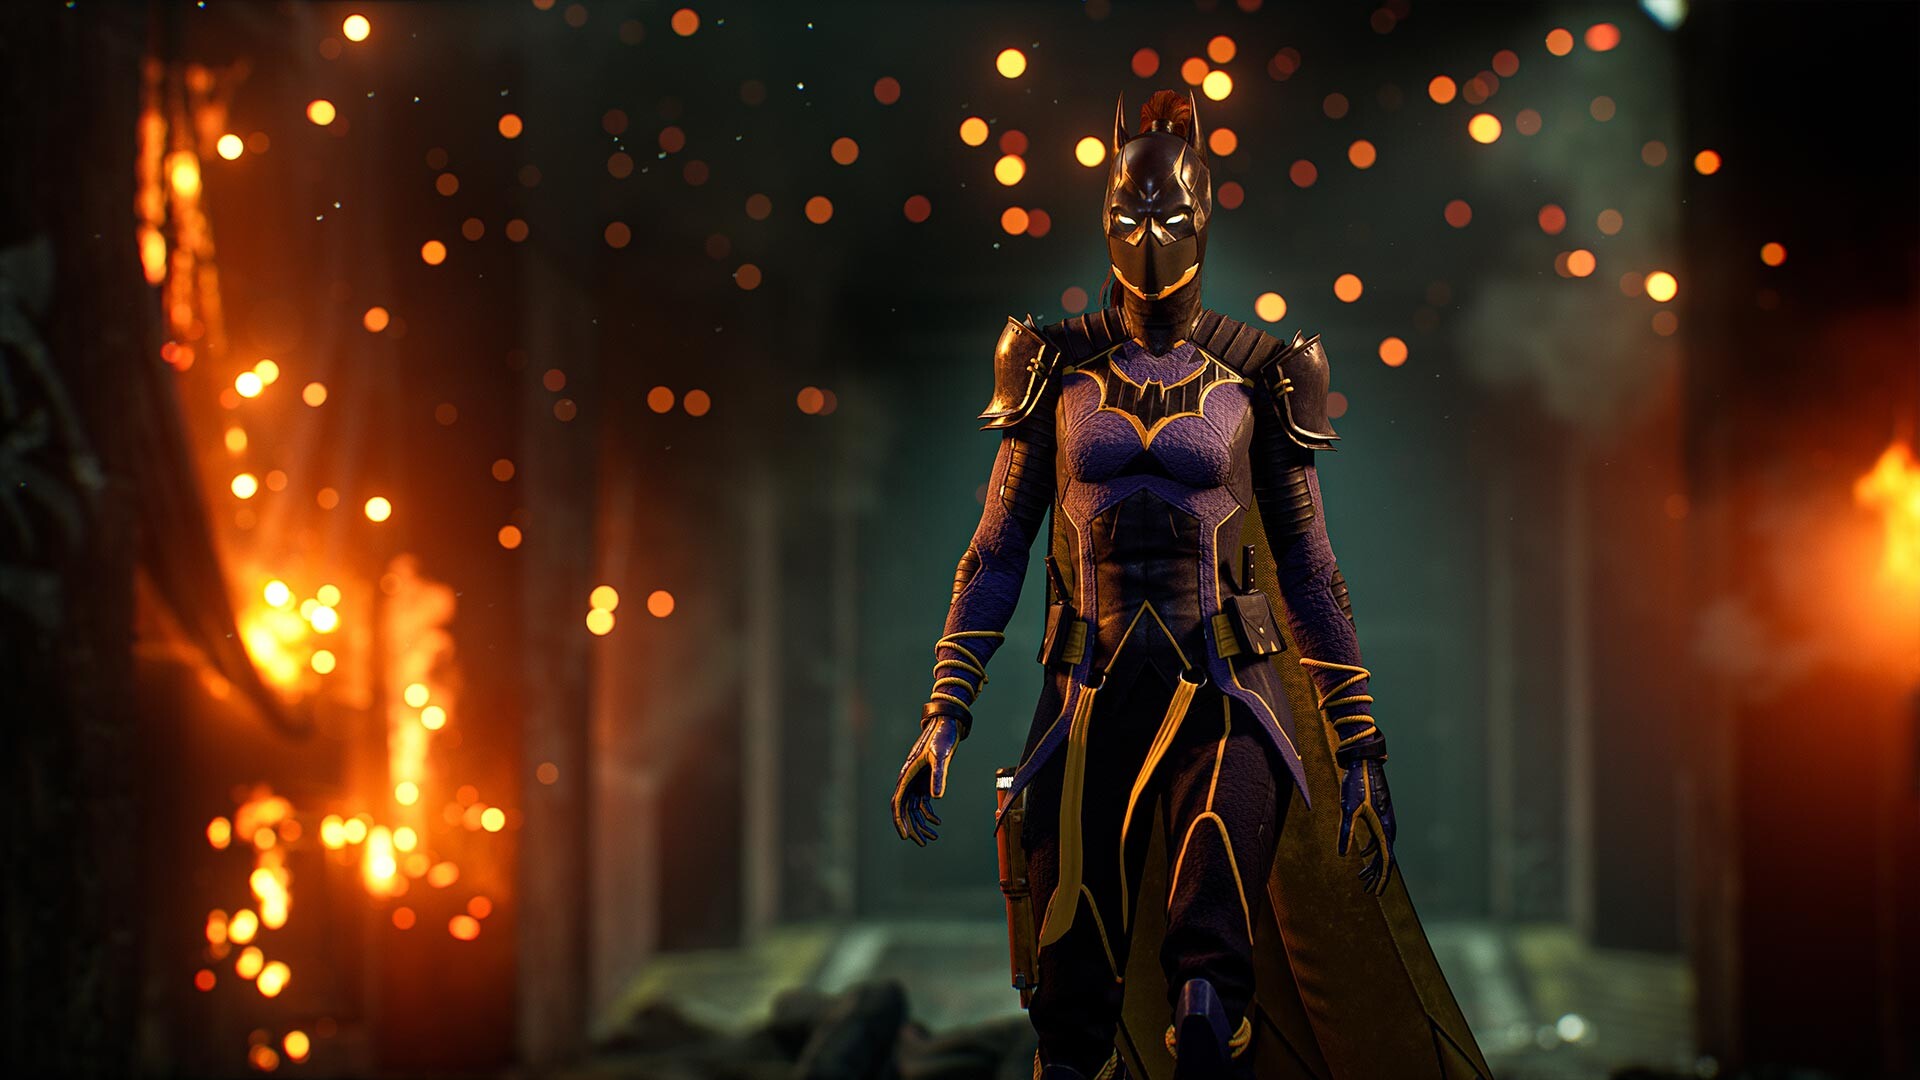 Gotham Knights Heroic Assault PS5 Patch Notes Adds 4-player Co-op